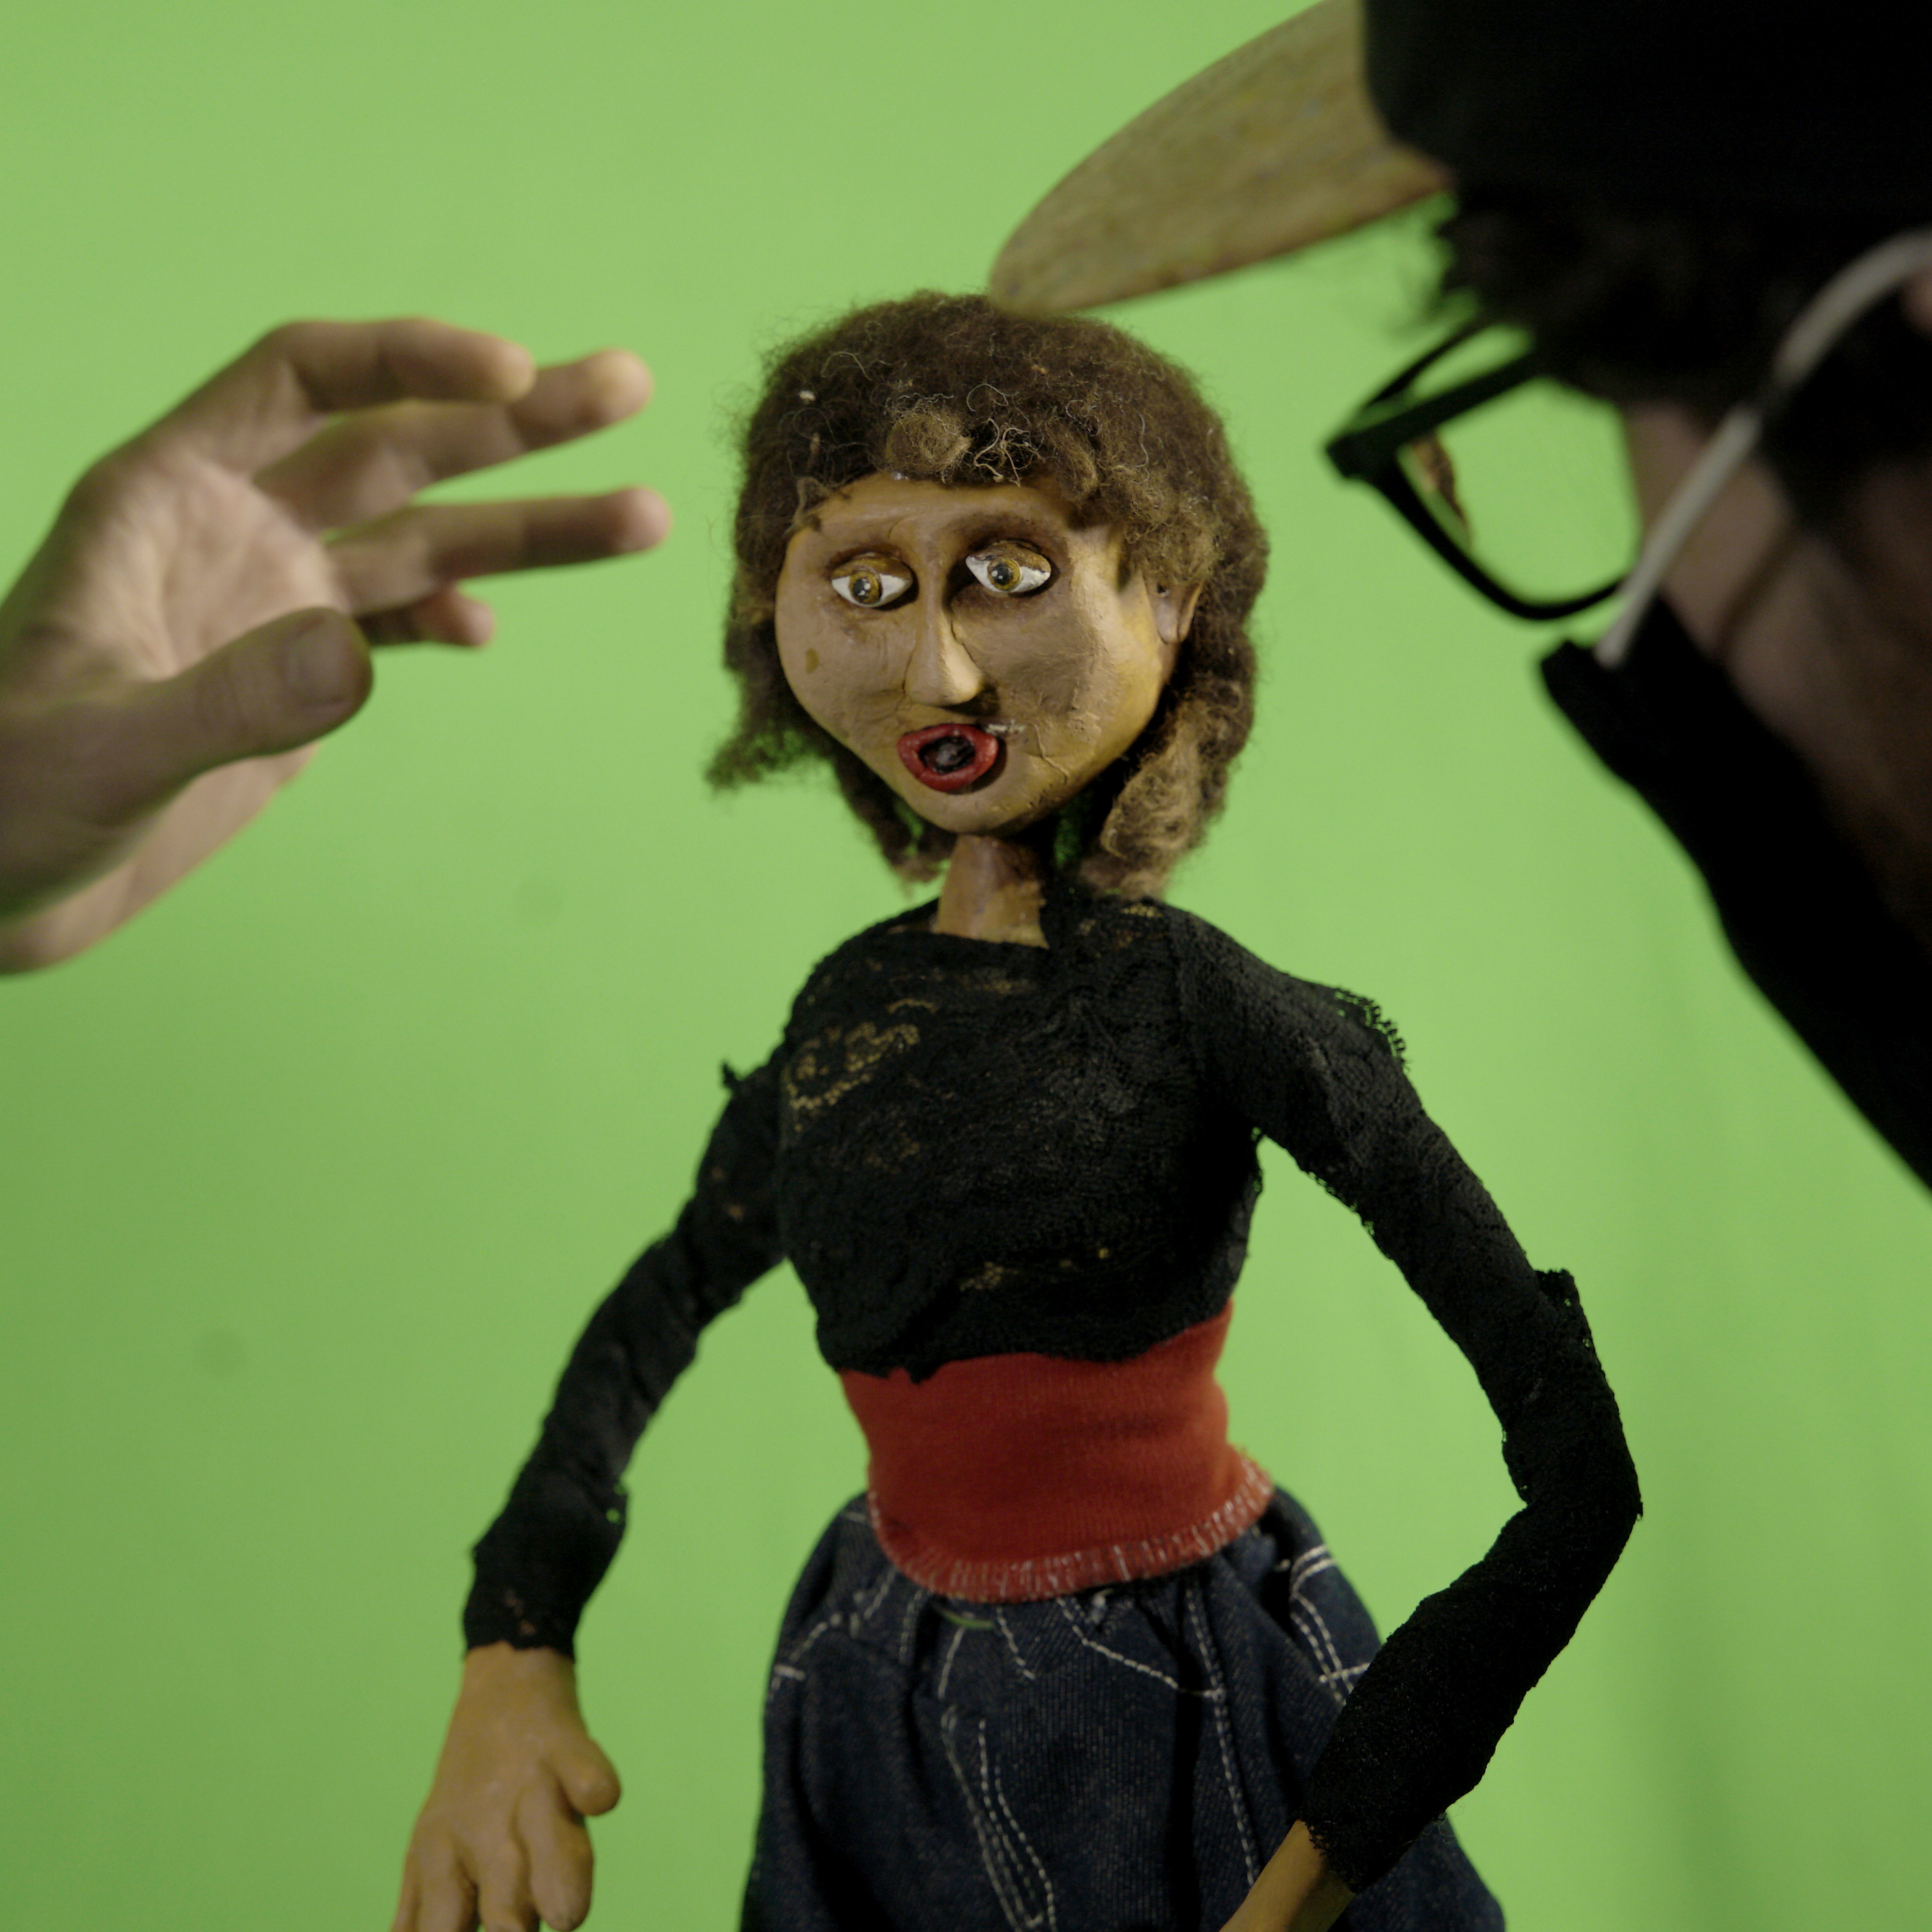 Animating the puppets